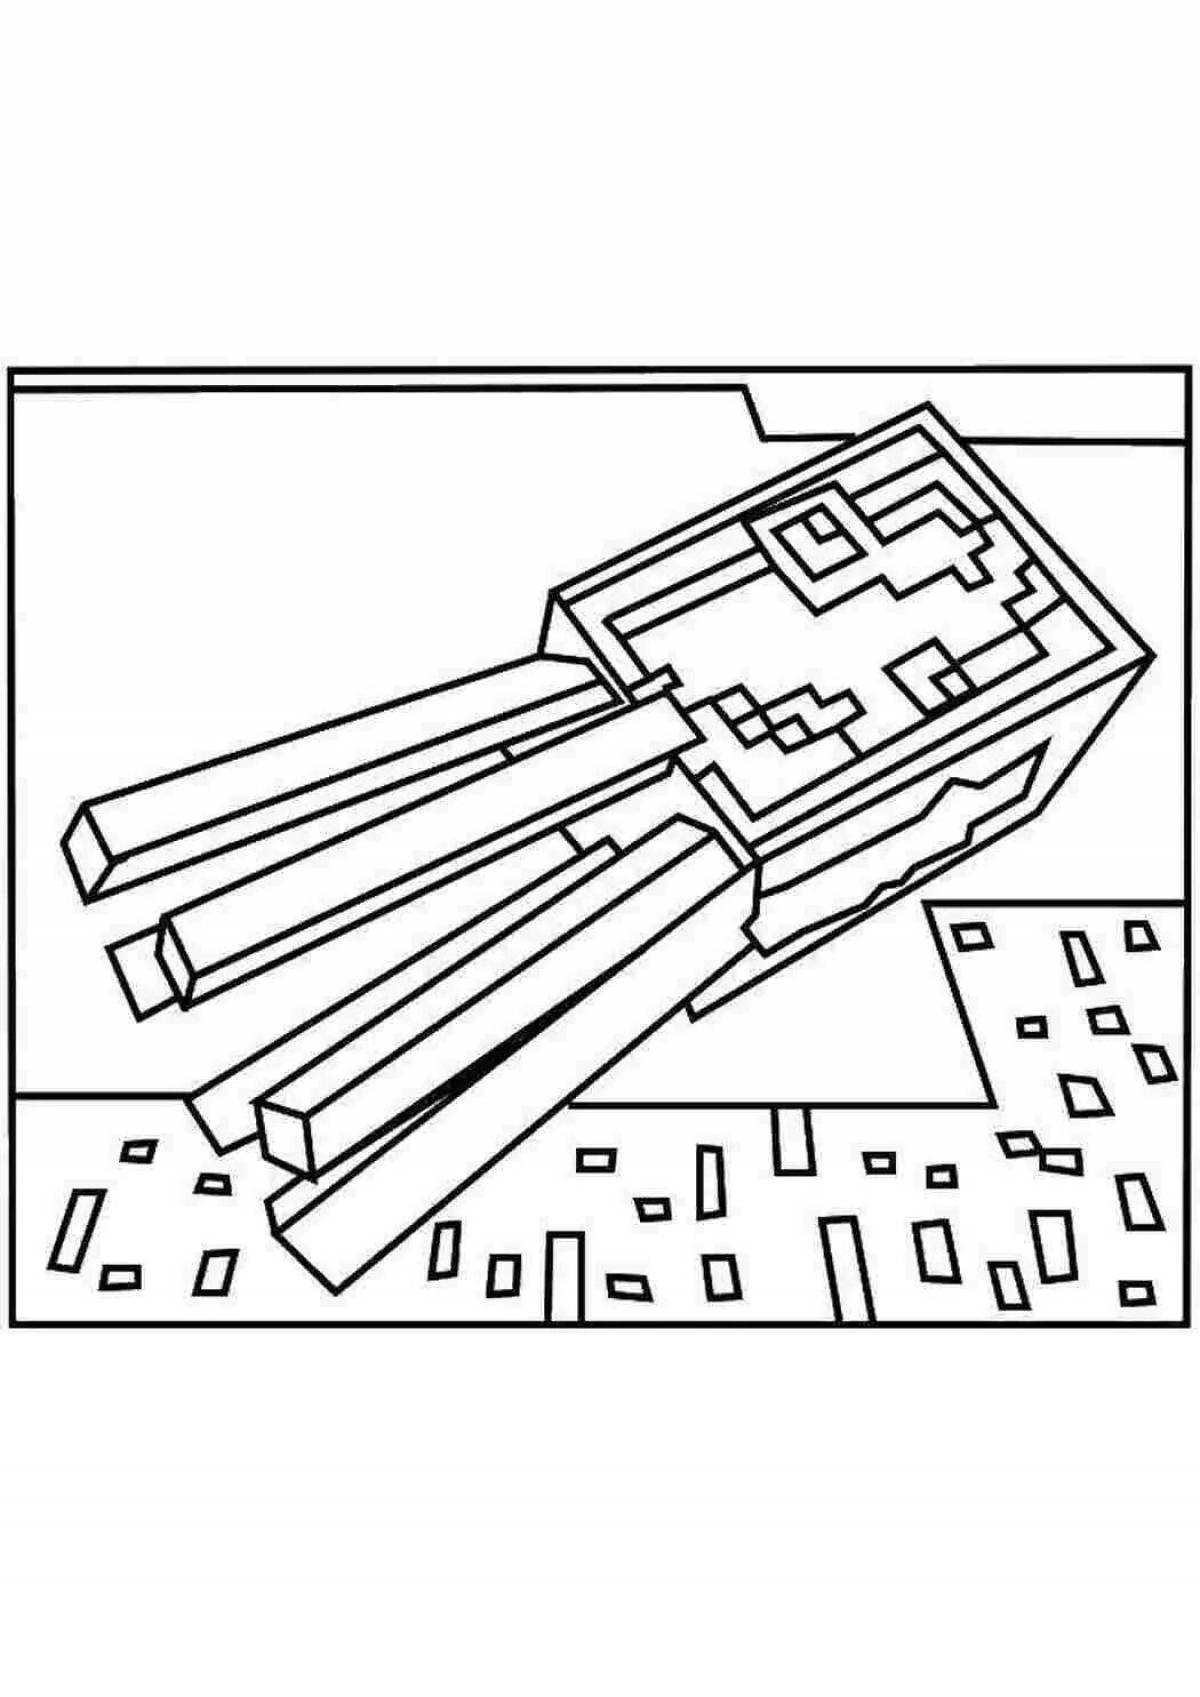 Fascinating minecraft world coloring page